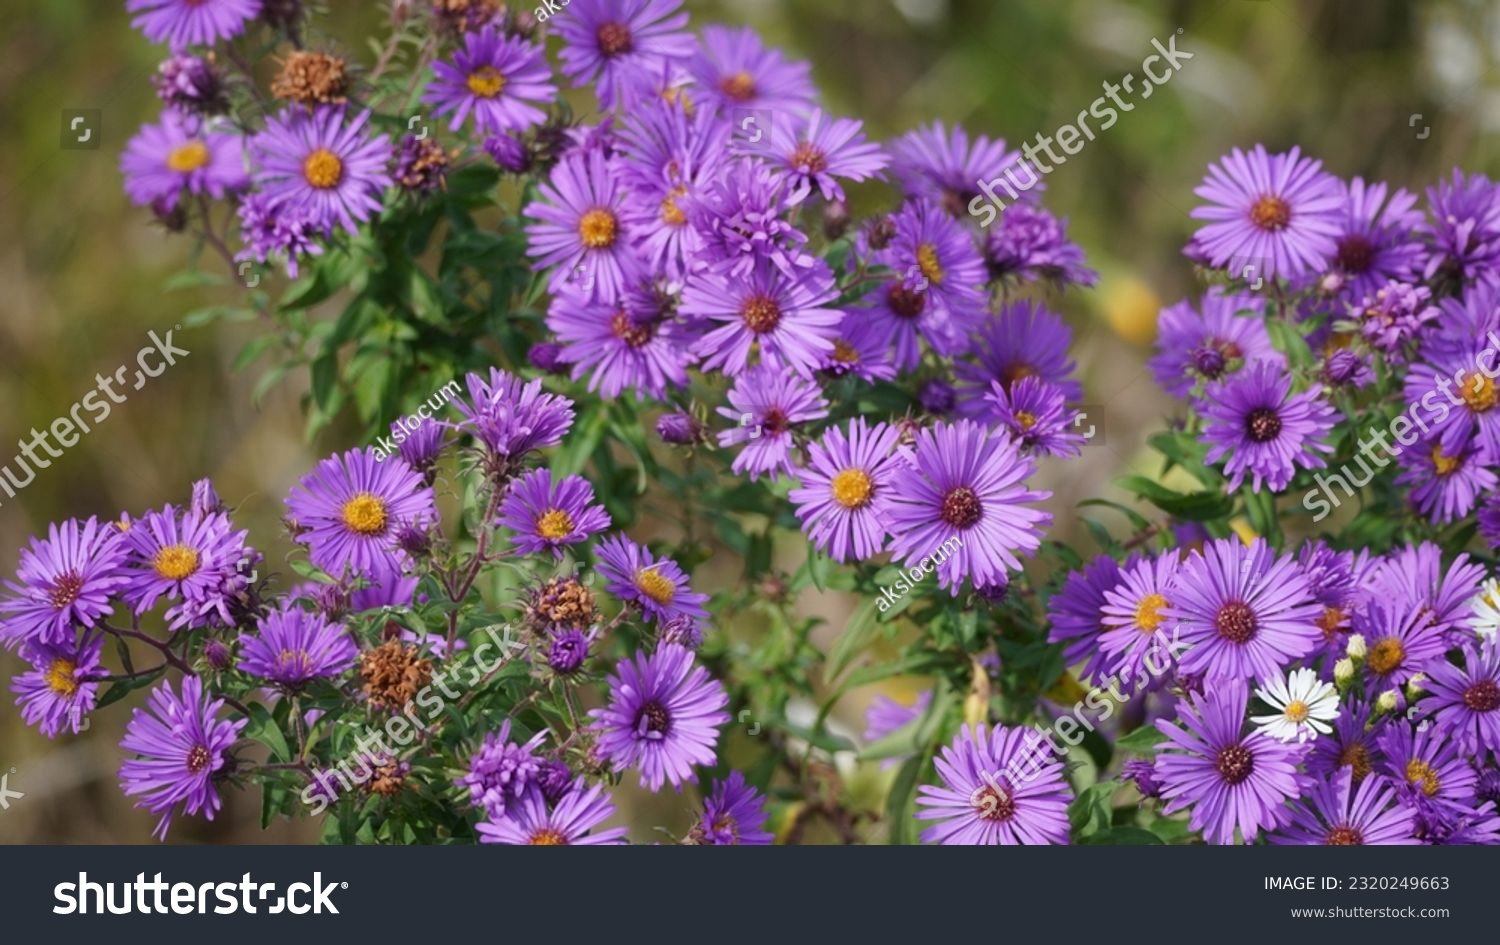 Symphyotrichum novae-angliae  is a species of flowering plant in the aster family (Asteraceae), commonly known as New England aster, hairy Michaelmas-daisy, or Michaelmas daisy #2320249663